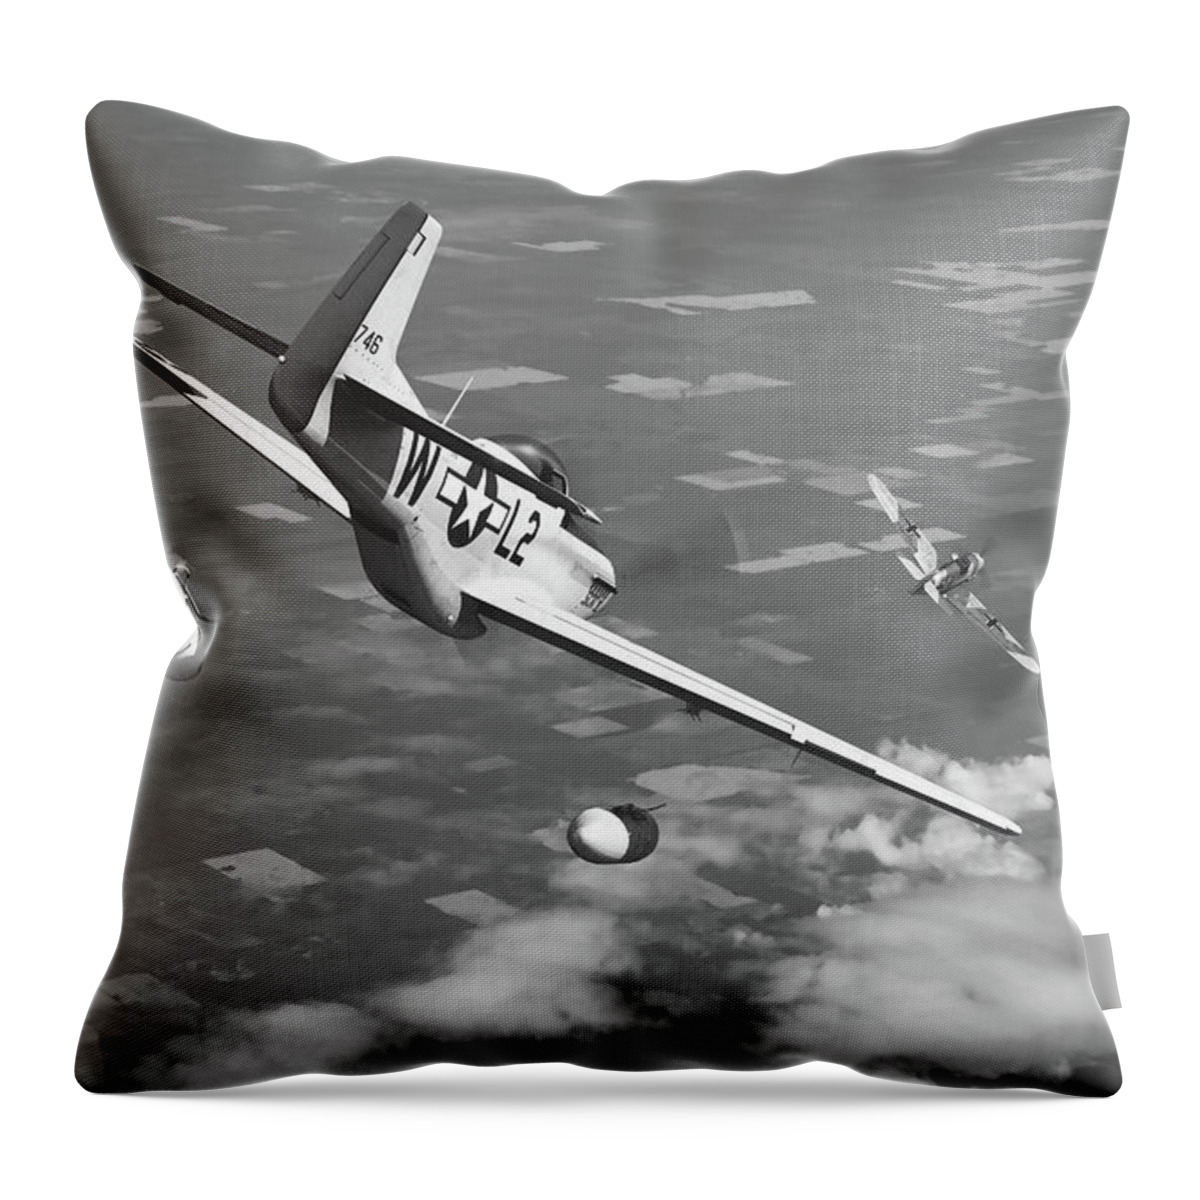 Usaaf Throw Pillow featuring the digital art Game On - Monochrome by Mark Donoghue